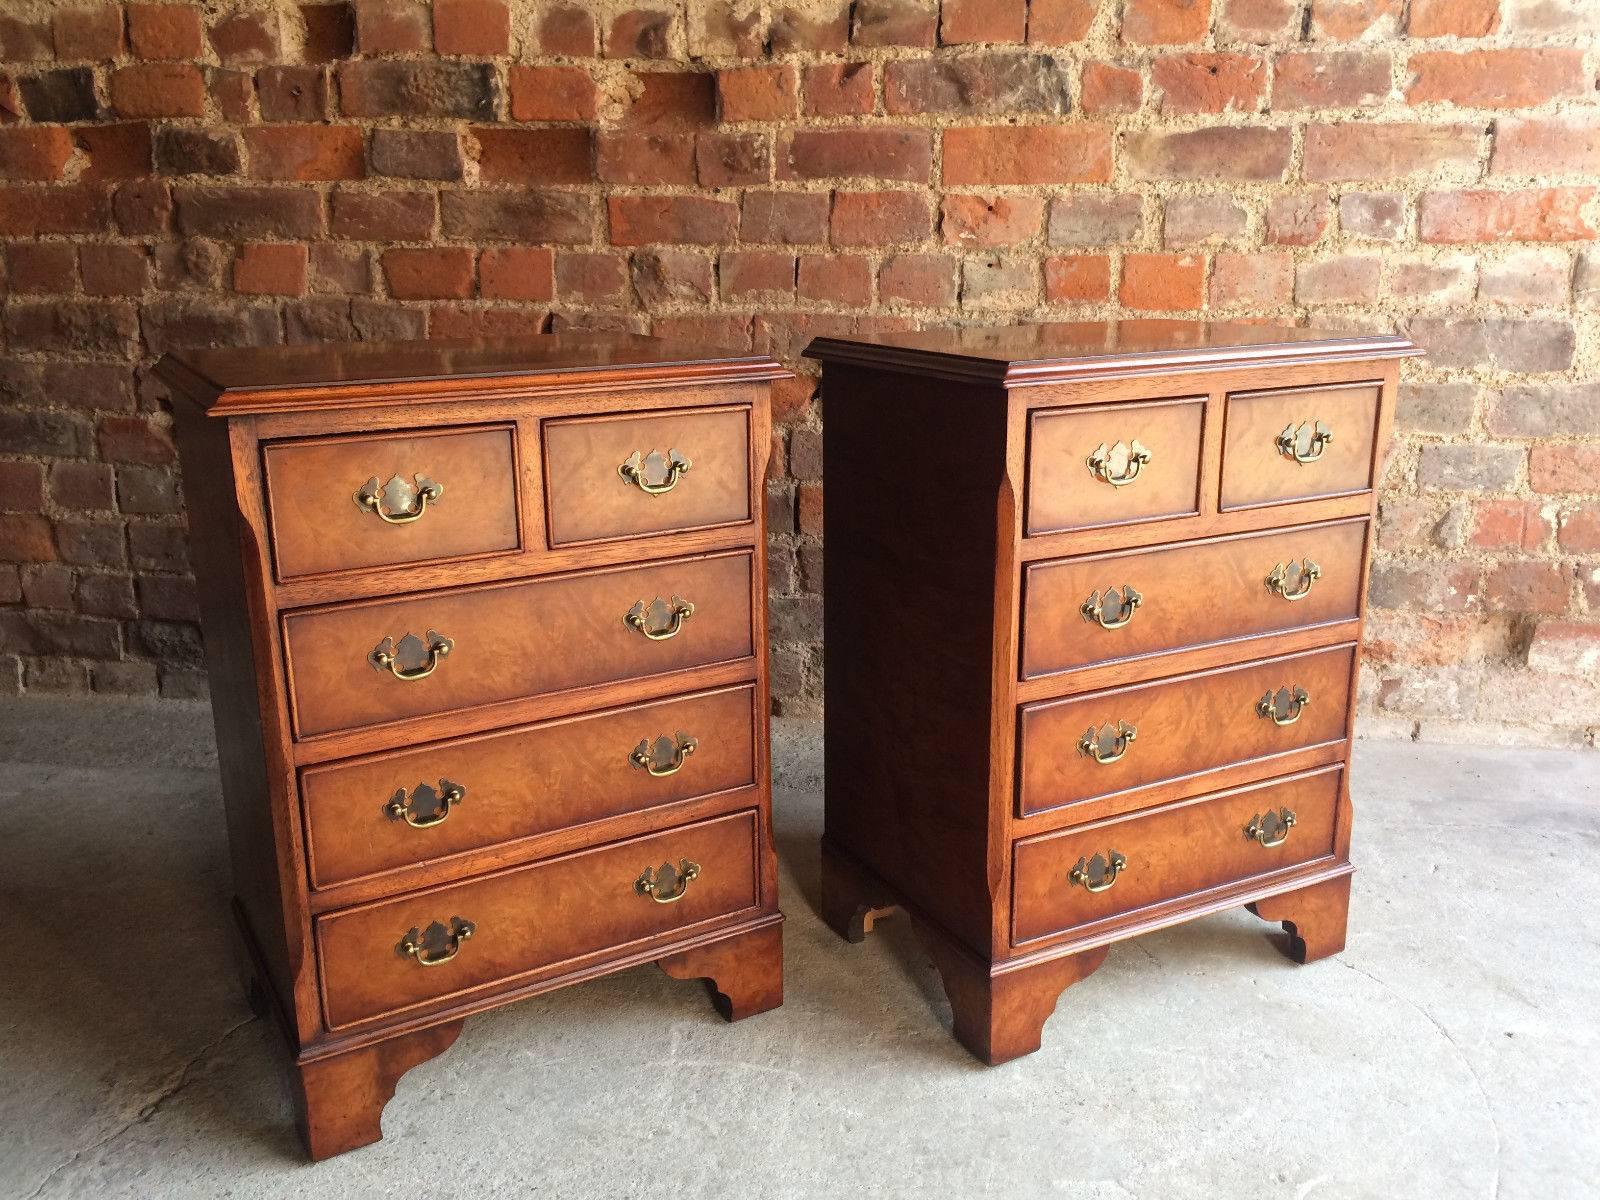 A wonderful pair of late 20th century George III style walnut bedside chests by Brights of Nettlebed, fitted with two short and three long drawers, raised on bracket feet, the chests would enhance any bedroom or living room used as side or light